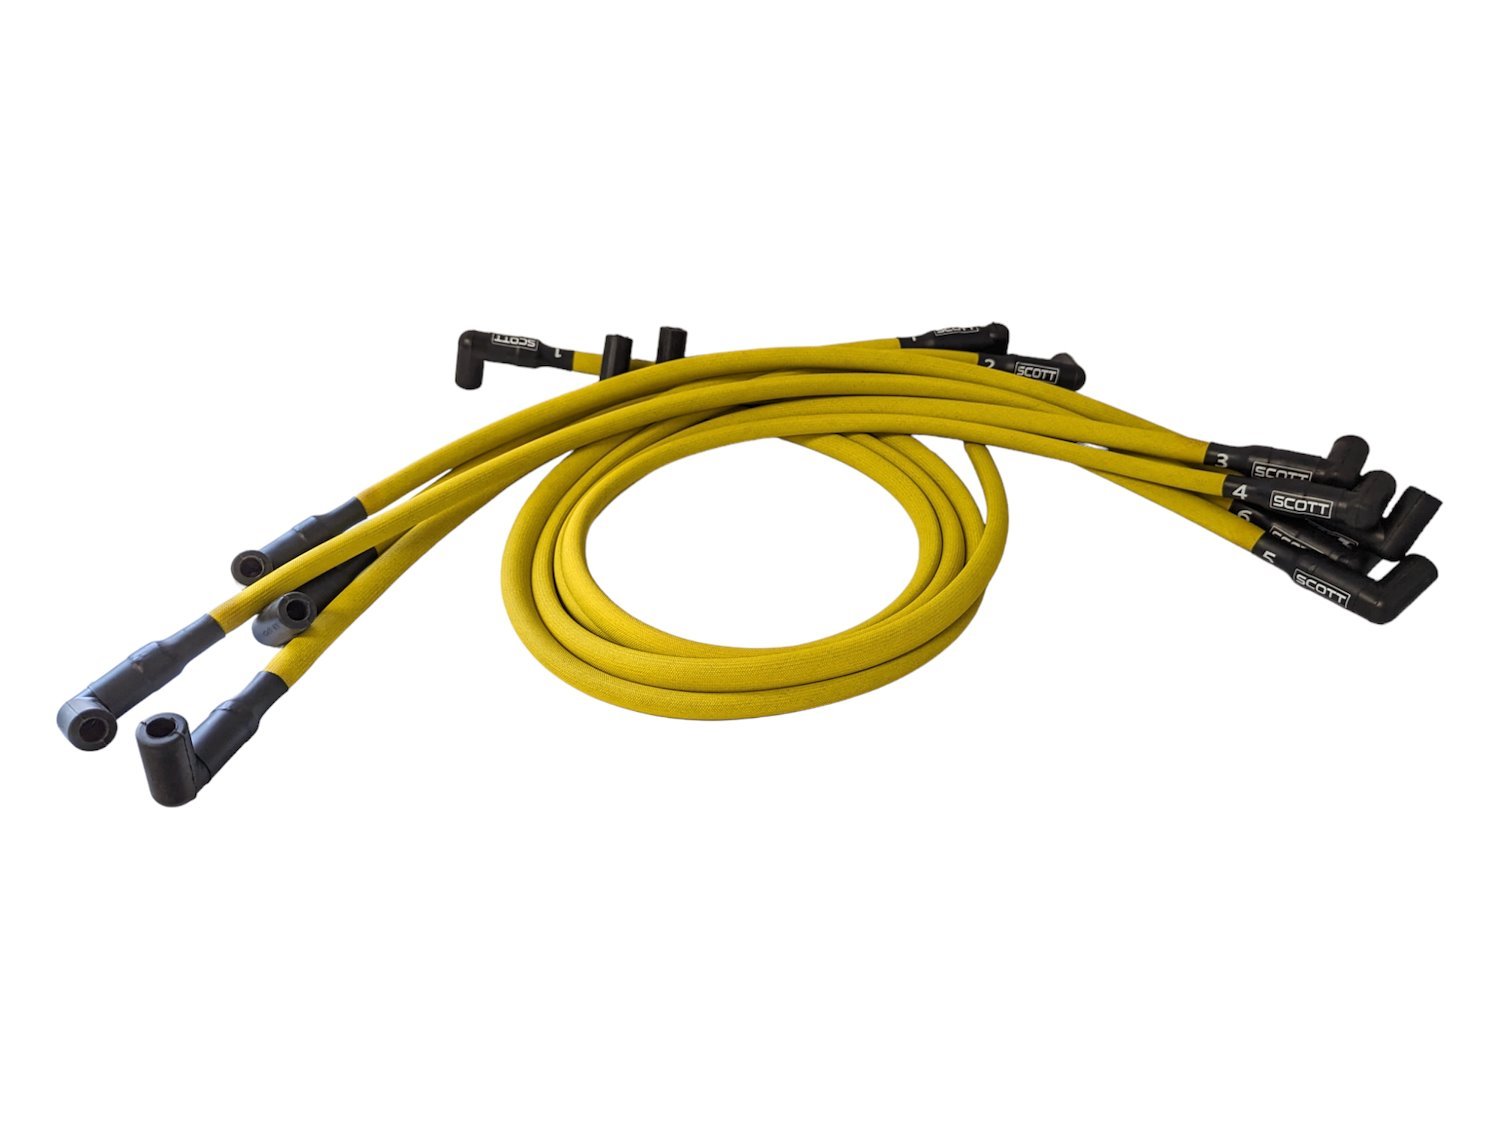 SPW300-PS-604-5 Super Mag Fiberglass-Oversleeved Spark Plug Wire Set for Small Block Chevy 604 Crate [Yellow]